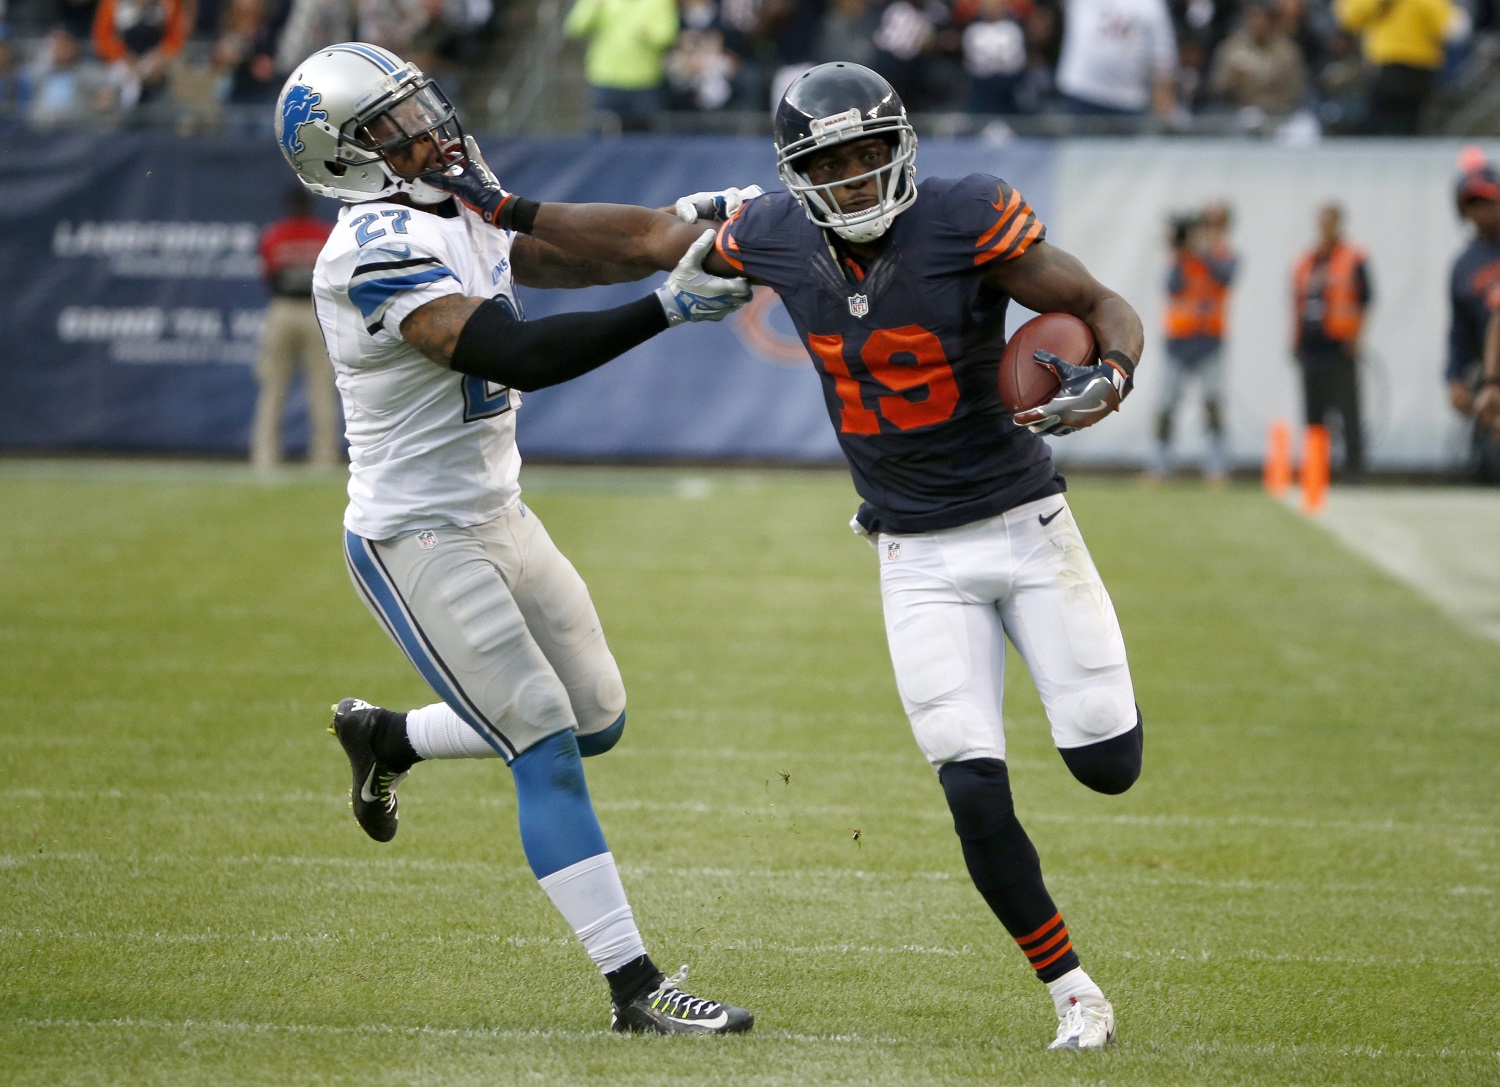 Chicago Bears wide receiver Eddie Royal (19) runs against Detroit Lions free safety Glover Quin (27) after receiving a pass during the second half of an NFL football game, Sunday, Oct. 2, 2016, in Chicago. (AP Photo/Nam Y. Huh)